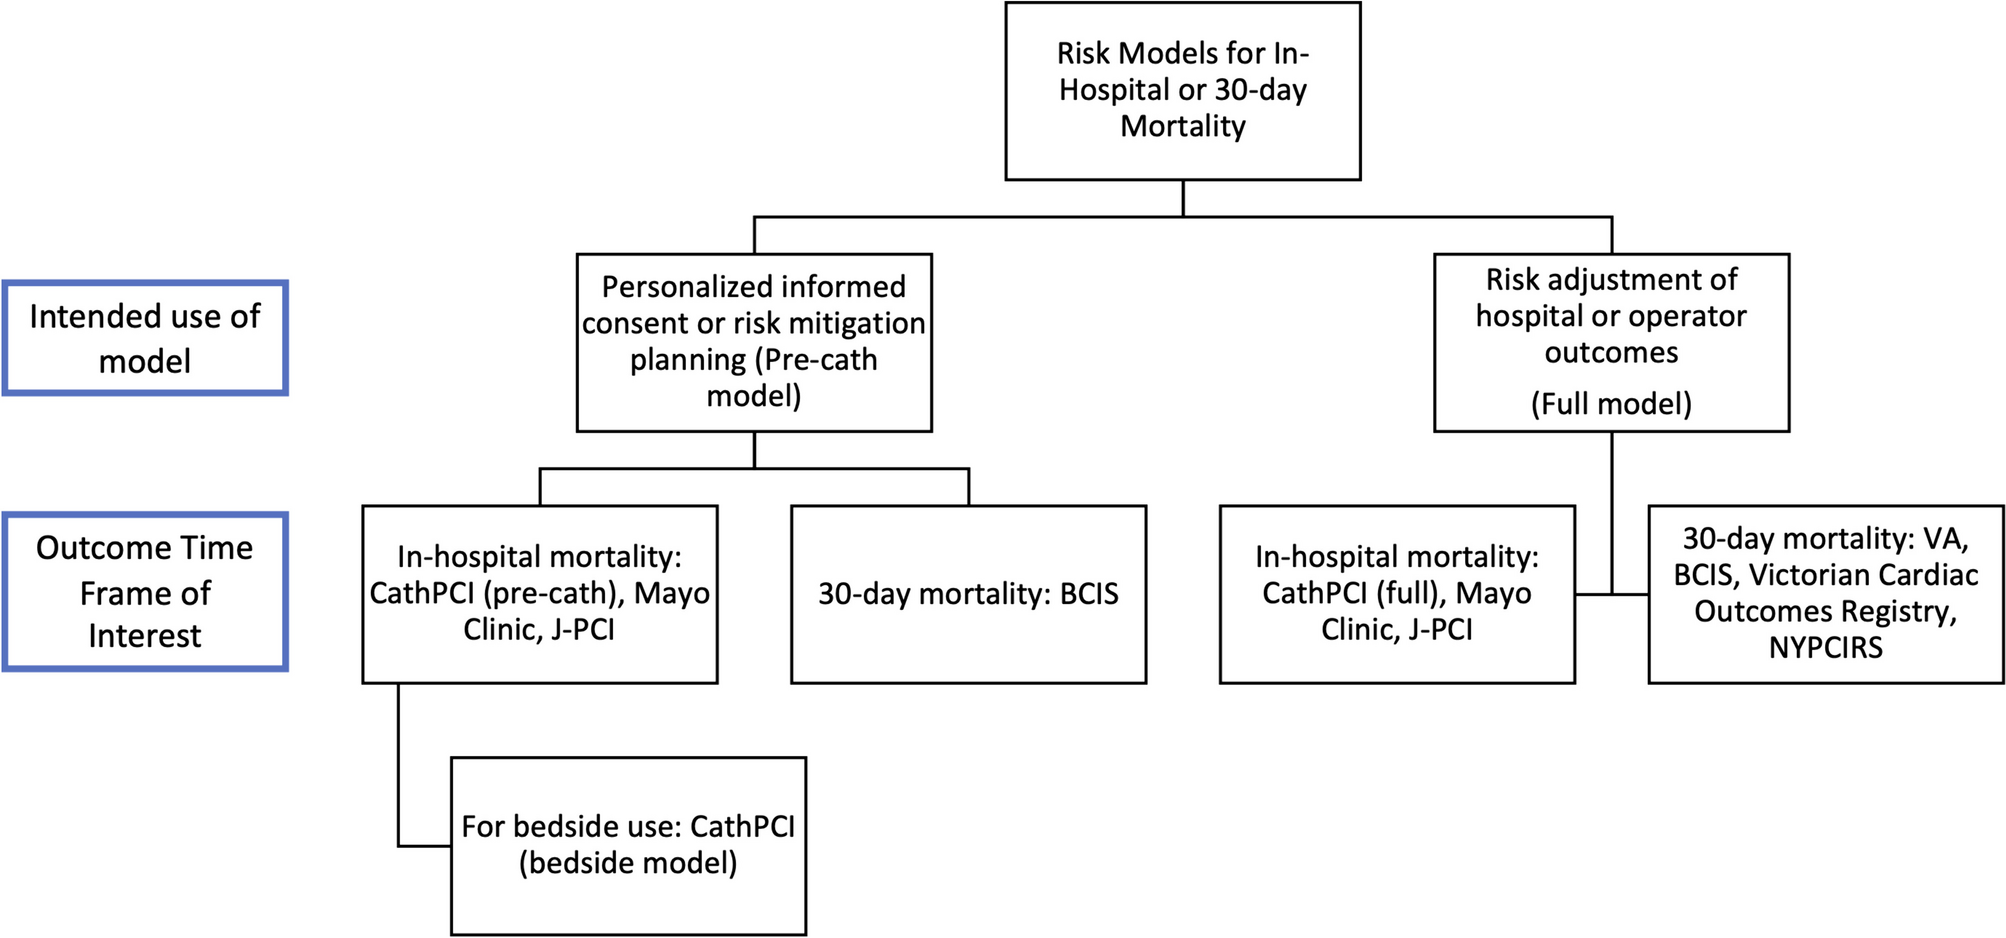 Contemporary Risk Models for In-Hospital and 30-Day Mortality After Percutaneous Coronary Intervention